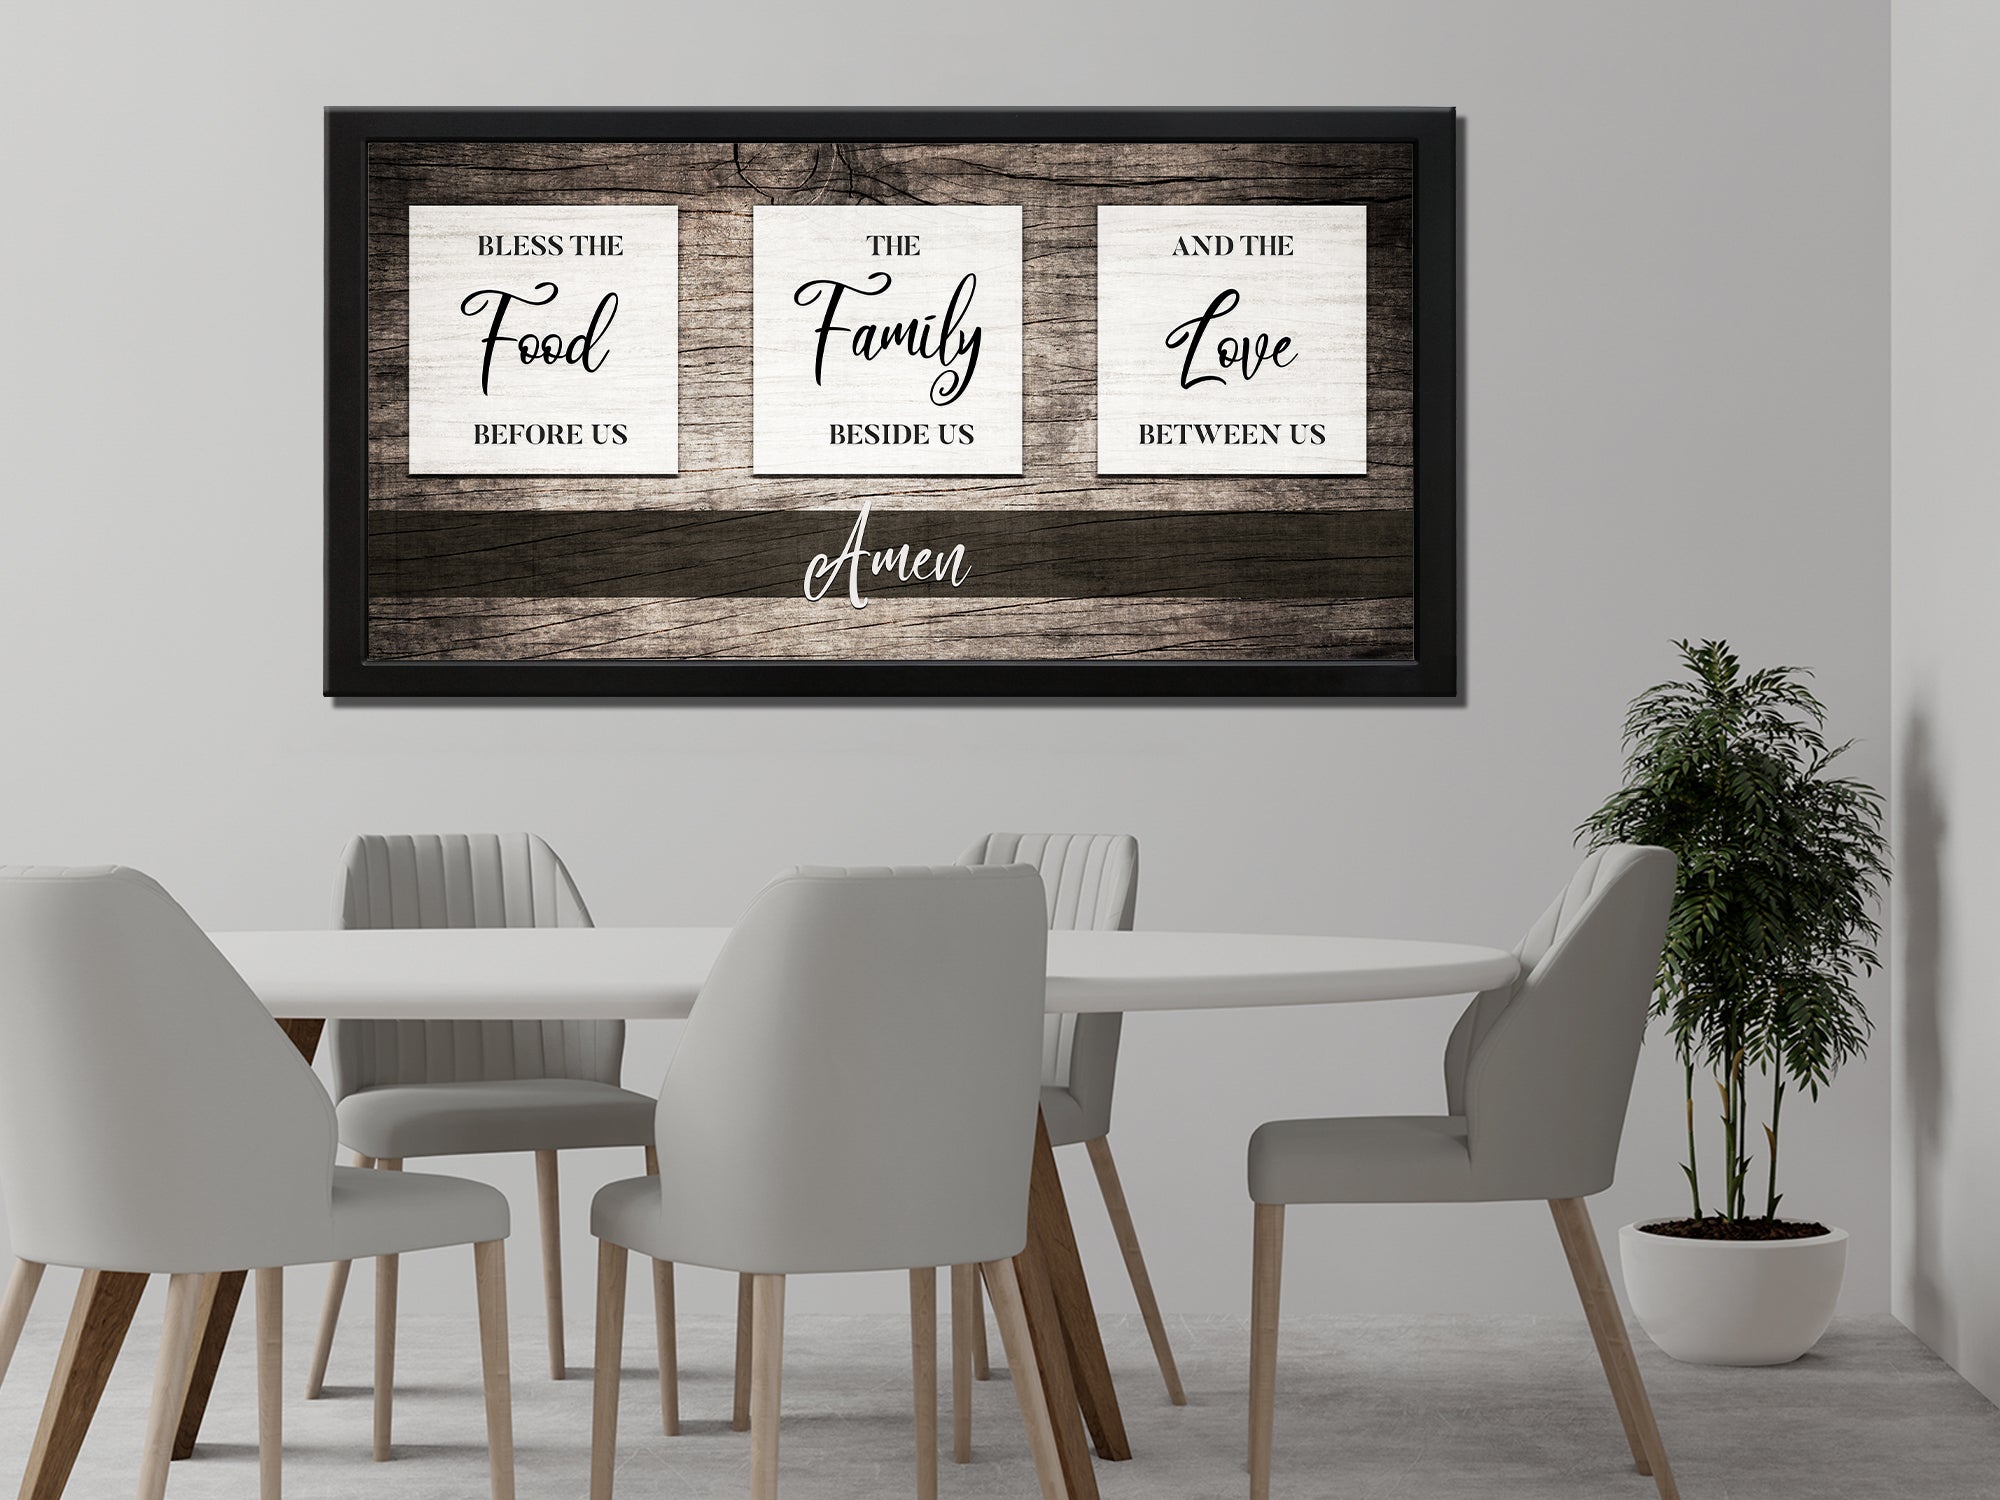 Bless The Food V2 Canvas Wall Art